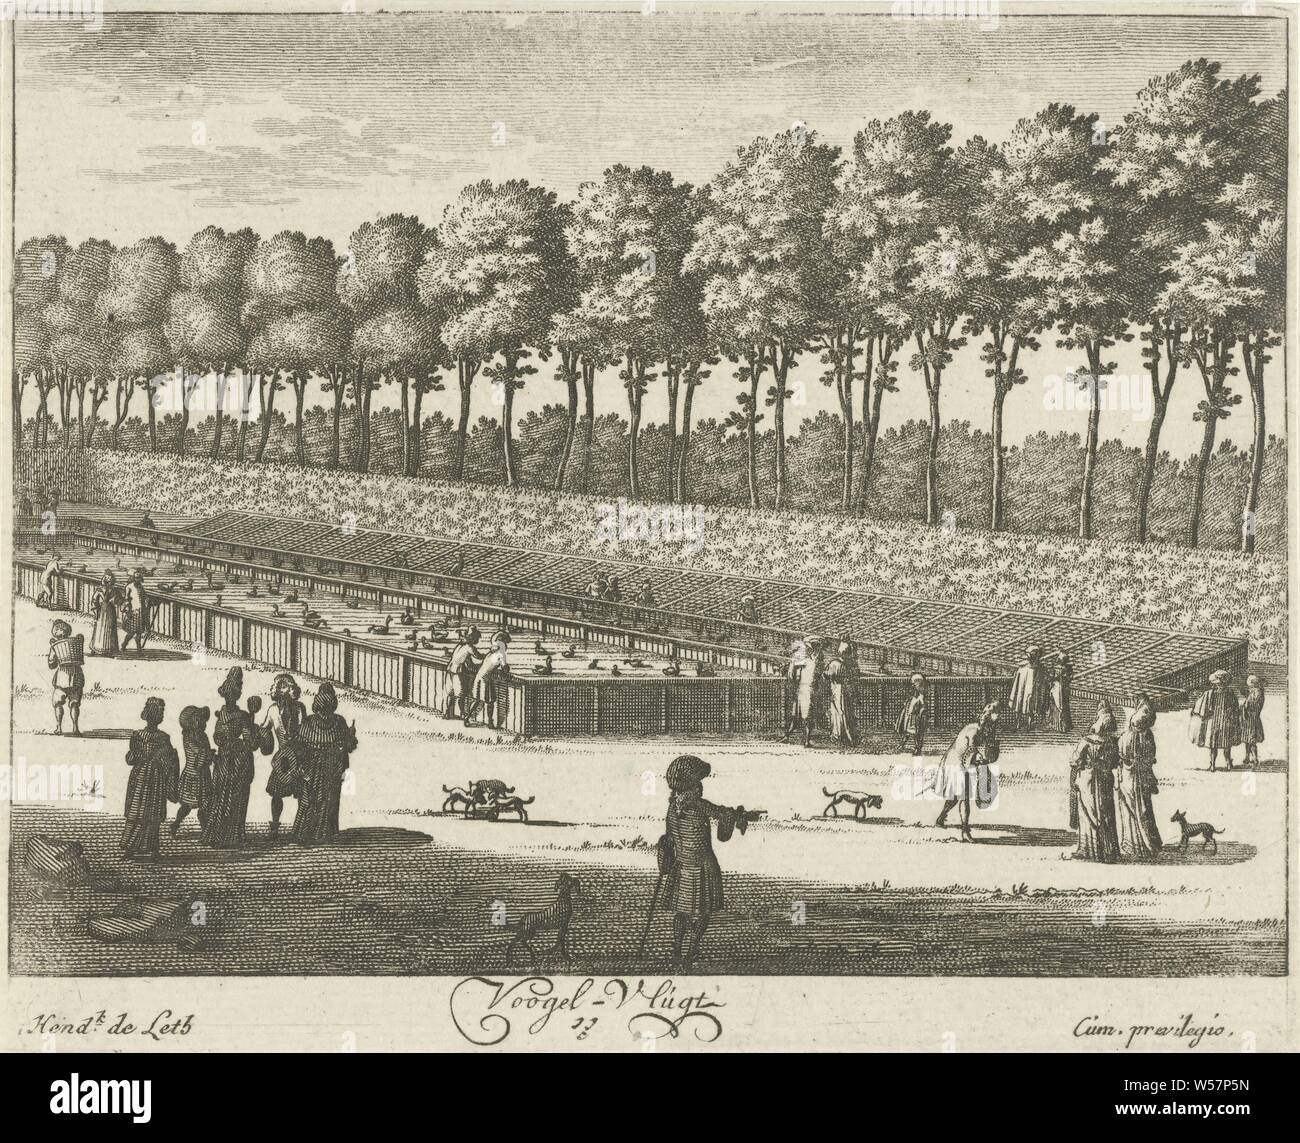 Duck pond of Soestdijk Palace Voogel-Vlugt (title on object) Generale Afbeeldinge Vant Lust-Huijs and Hof van sijn Royal Majesty of Great Britain t Soest-Dijk (series title), View of the duck pond in the garden of Soestdijk Palace, with walking figures. The print is part of a series with sixteen faces at Soestdijk Palace and the accompanying estate, palace, water-birds: duck, pond, pool (variant), Soestdijk, Hendrik de Leth (mentioned on object), 1725 - 1747, paper, etching, h 135 mm × w 160 mm Stock Photo